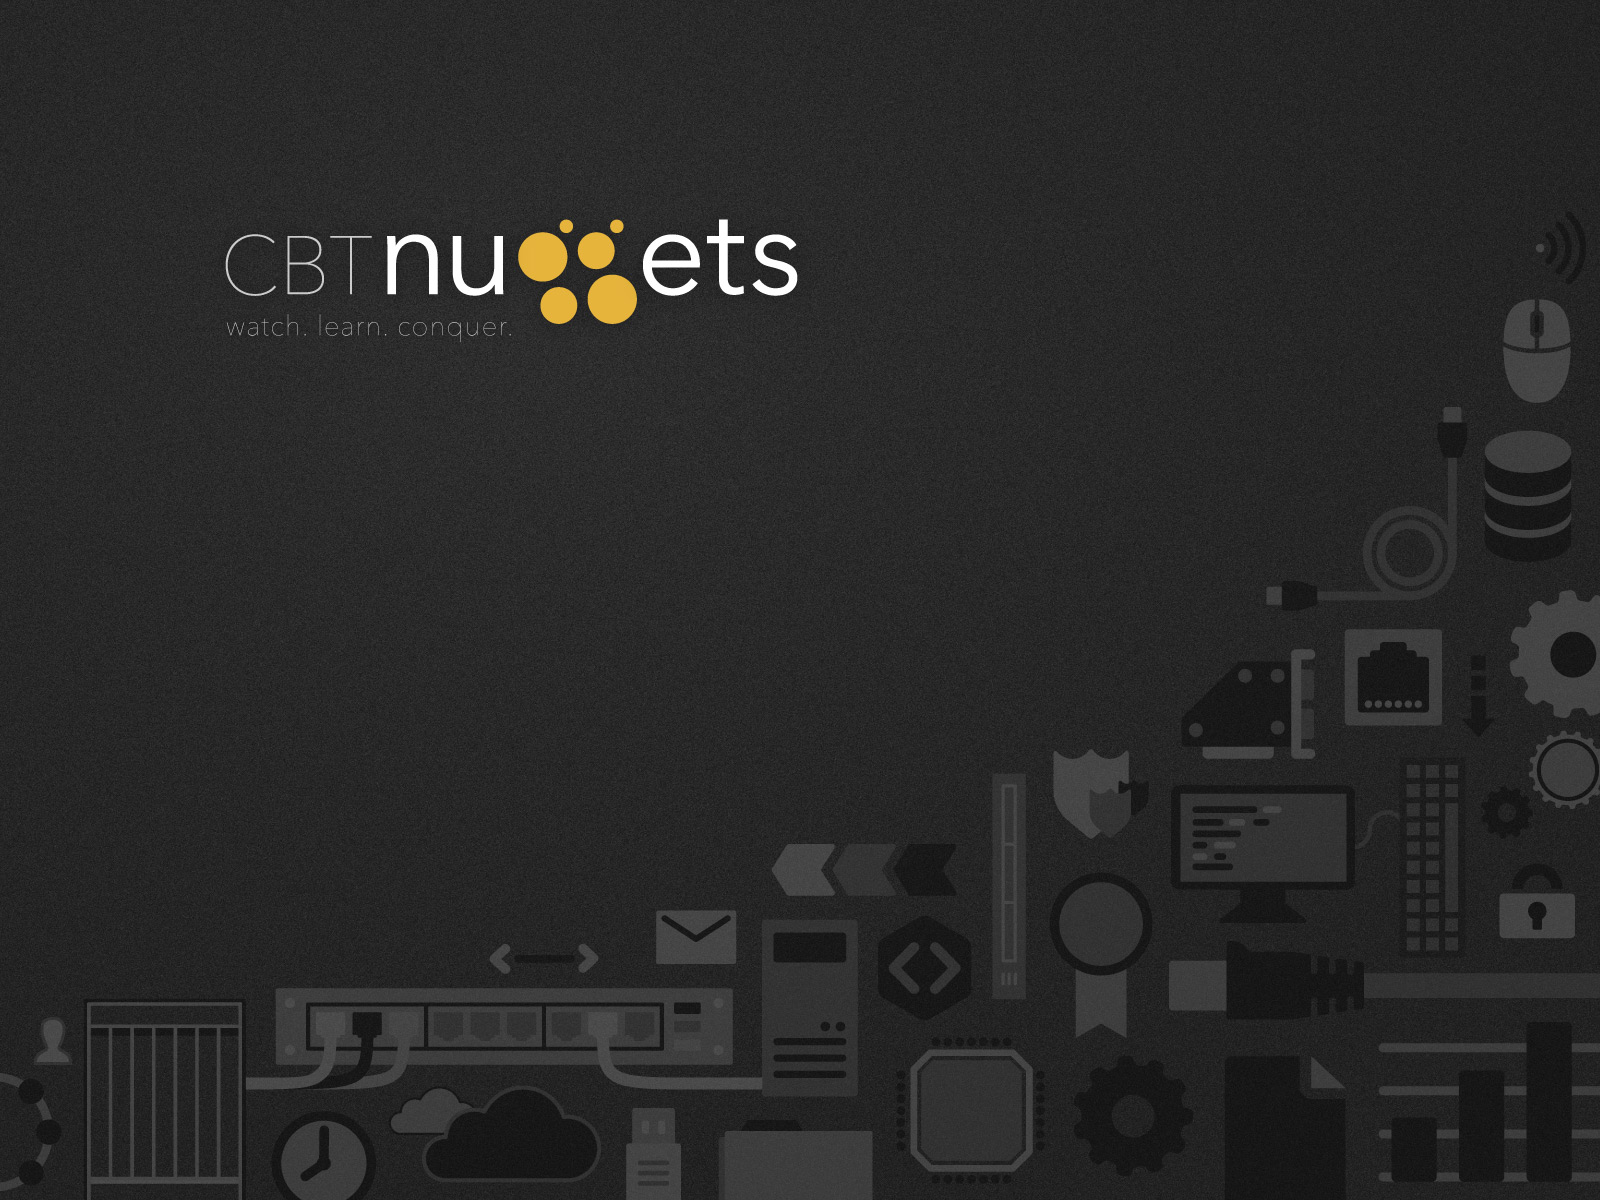 How To Cancel Cbt Nuggets Free Trial